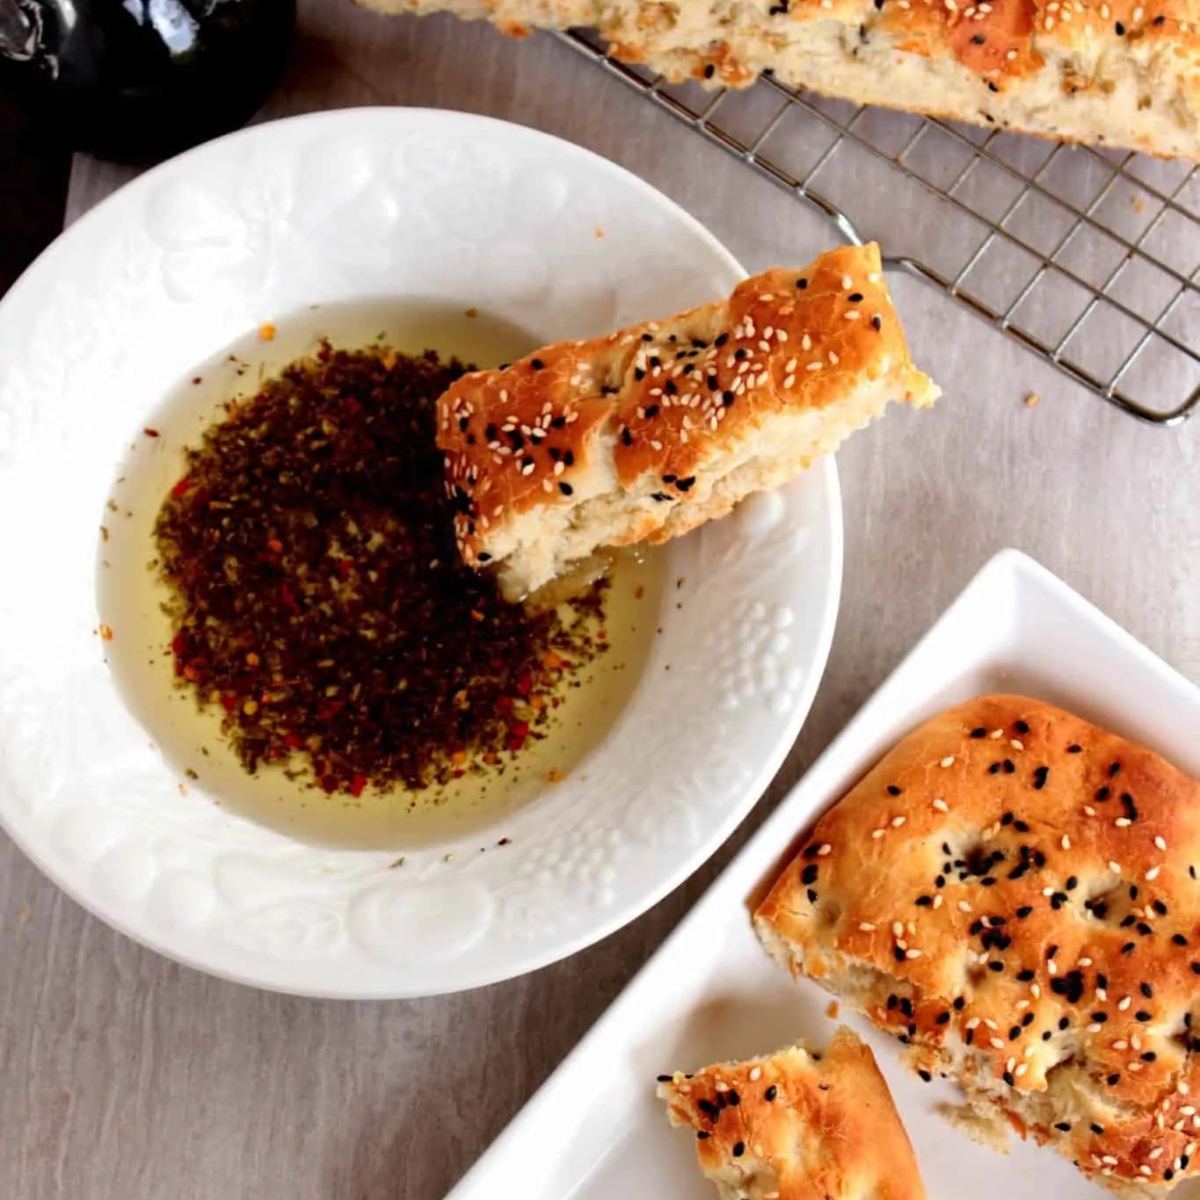 Garlic and Herb Bread Dipping Oil - The Chunky Chef